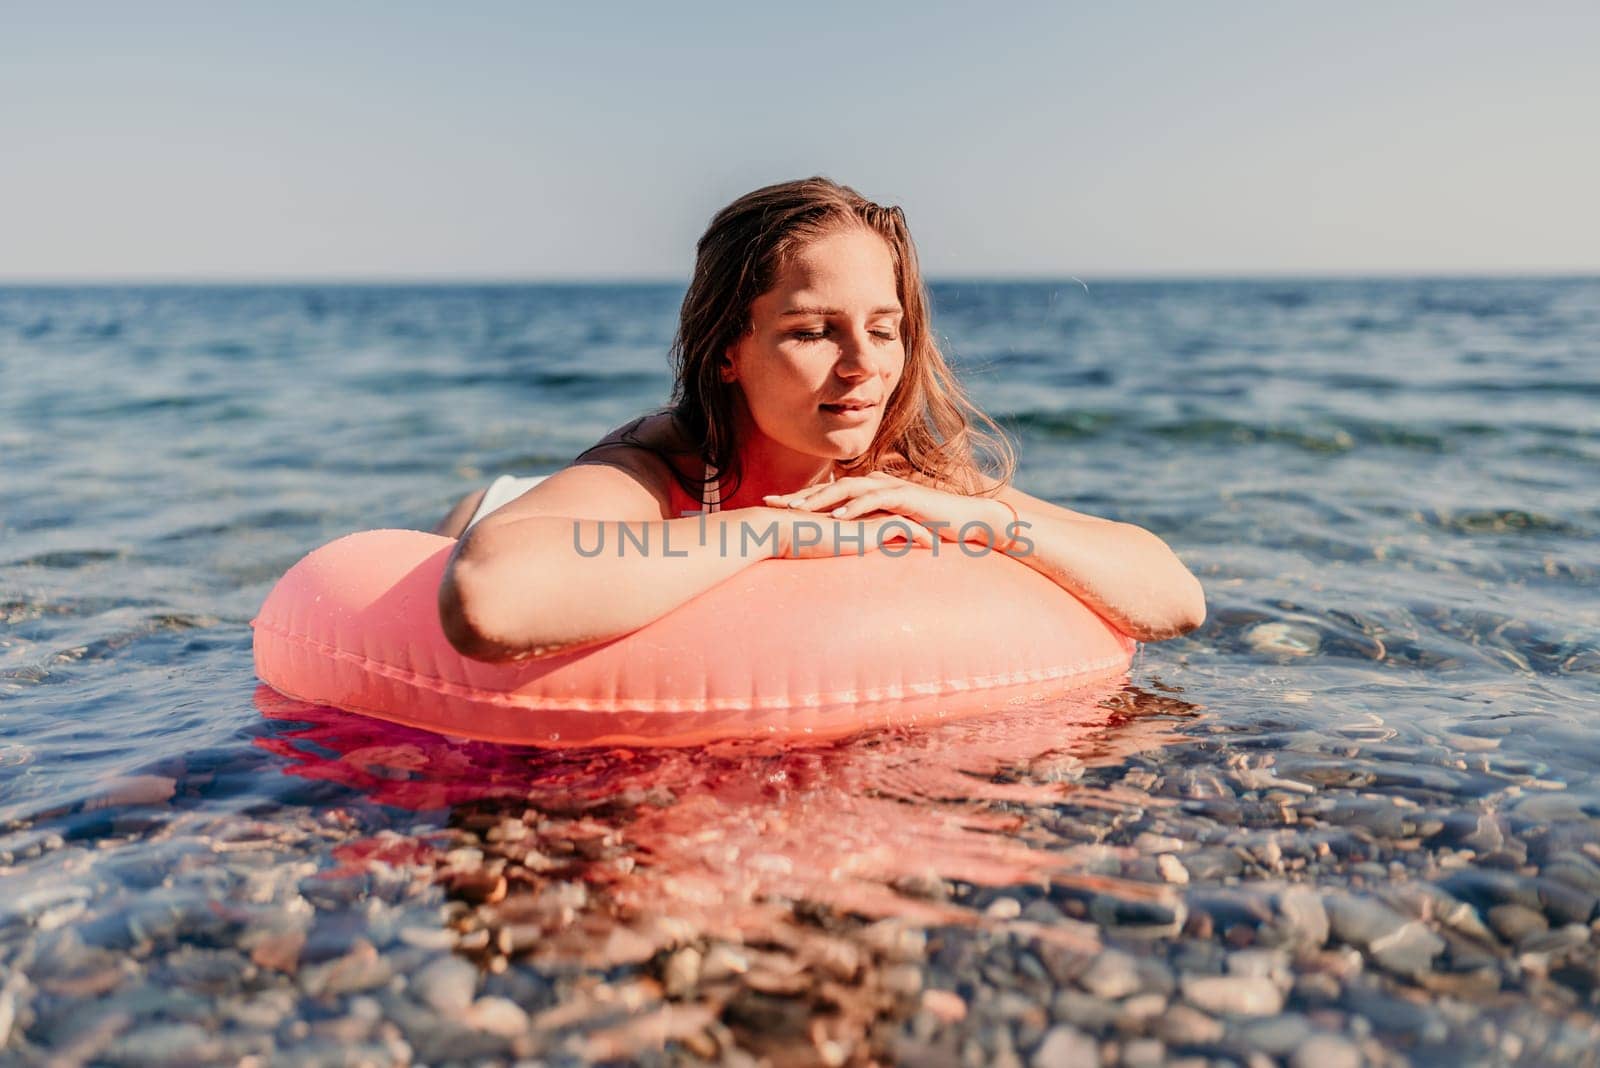 A woman is laying on a red inflatable ring in the ocean. The water is calm and the sky is clear. The woman is enjoying her time in the water